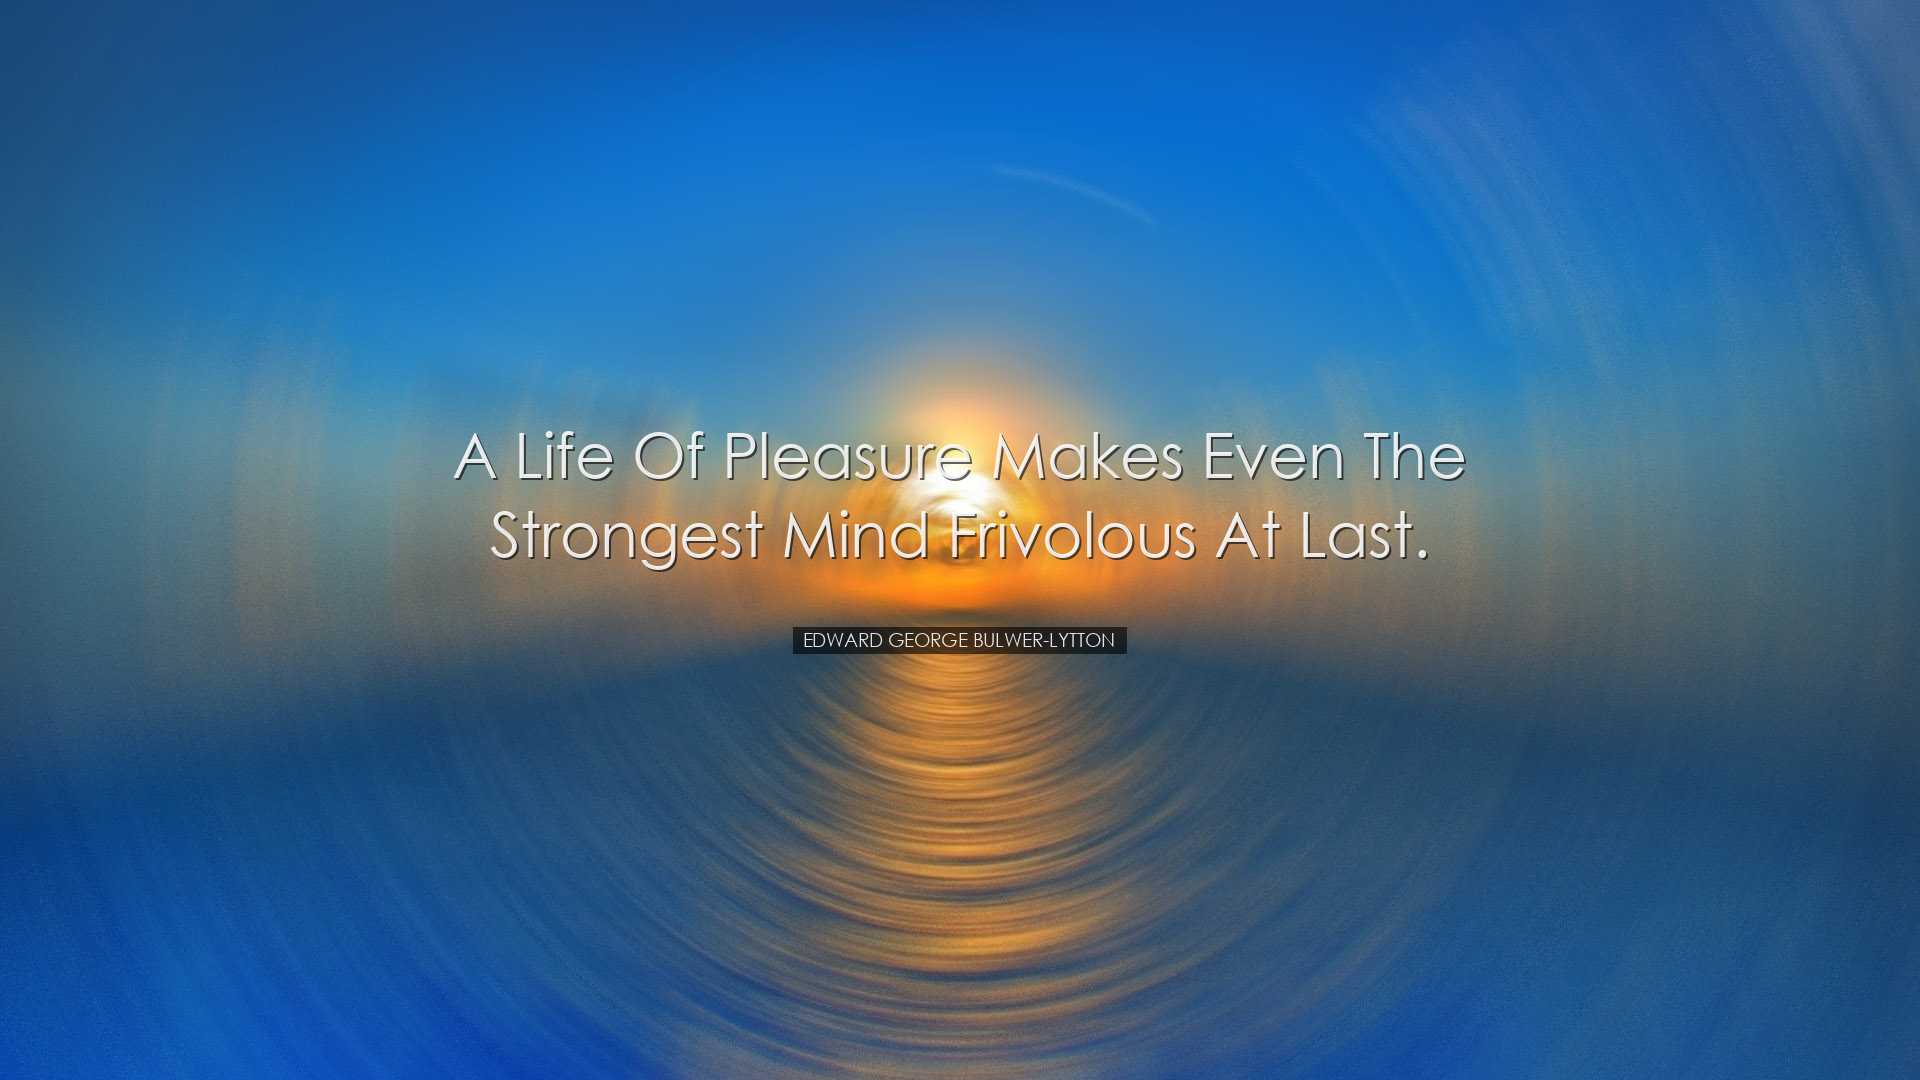 A life of pleasure makes even the strongest mind frivolous at last